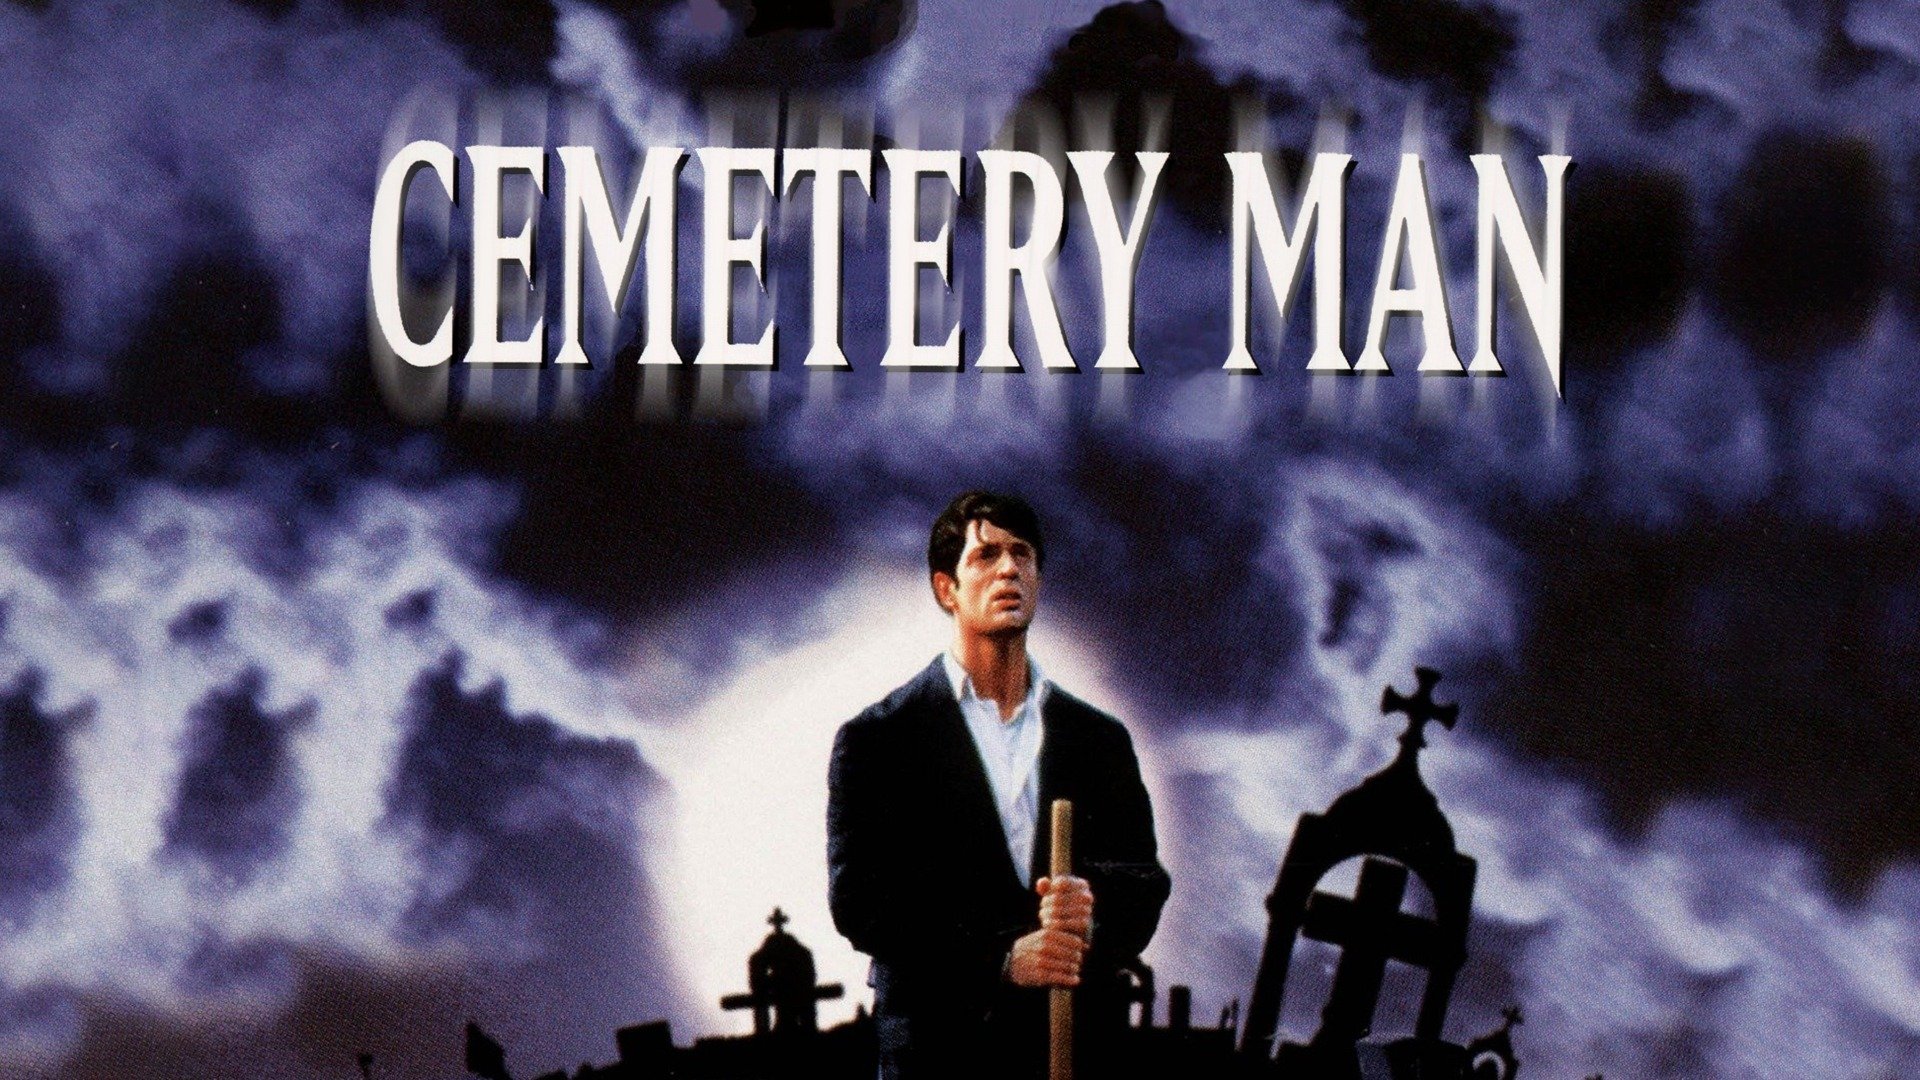 37-facts-about-the-movie-cemetery-man